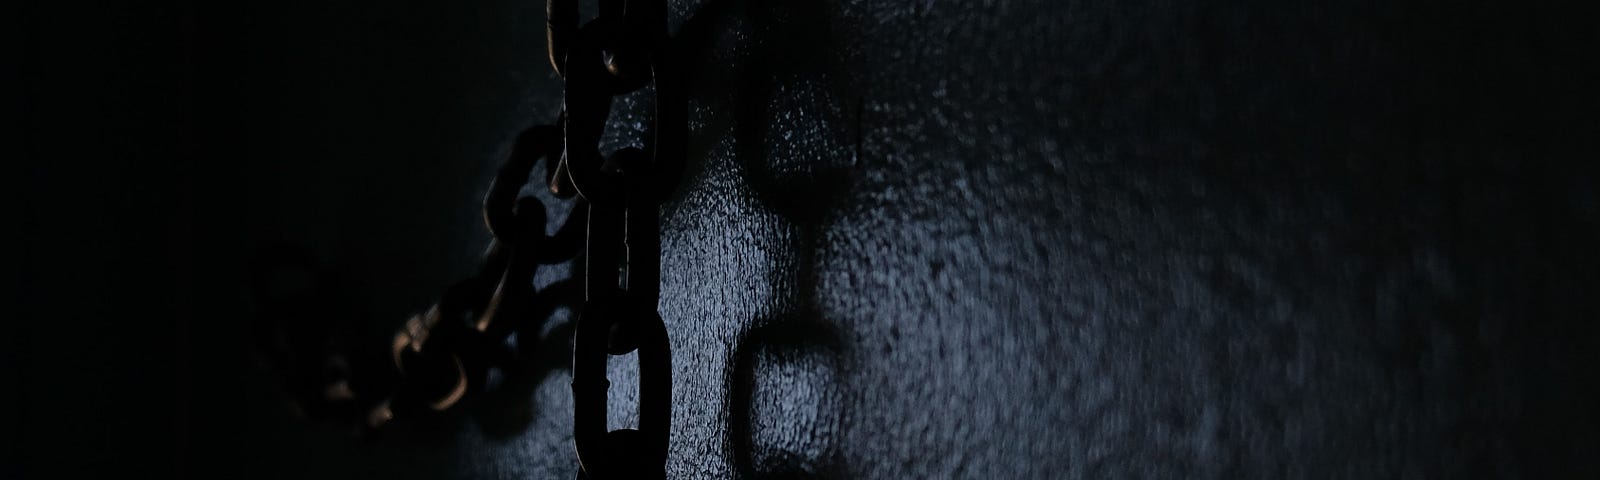 A chain hanging from a hook on a dark wall, casting a shadow.